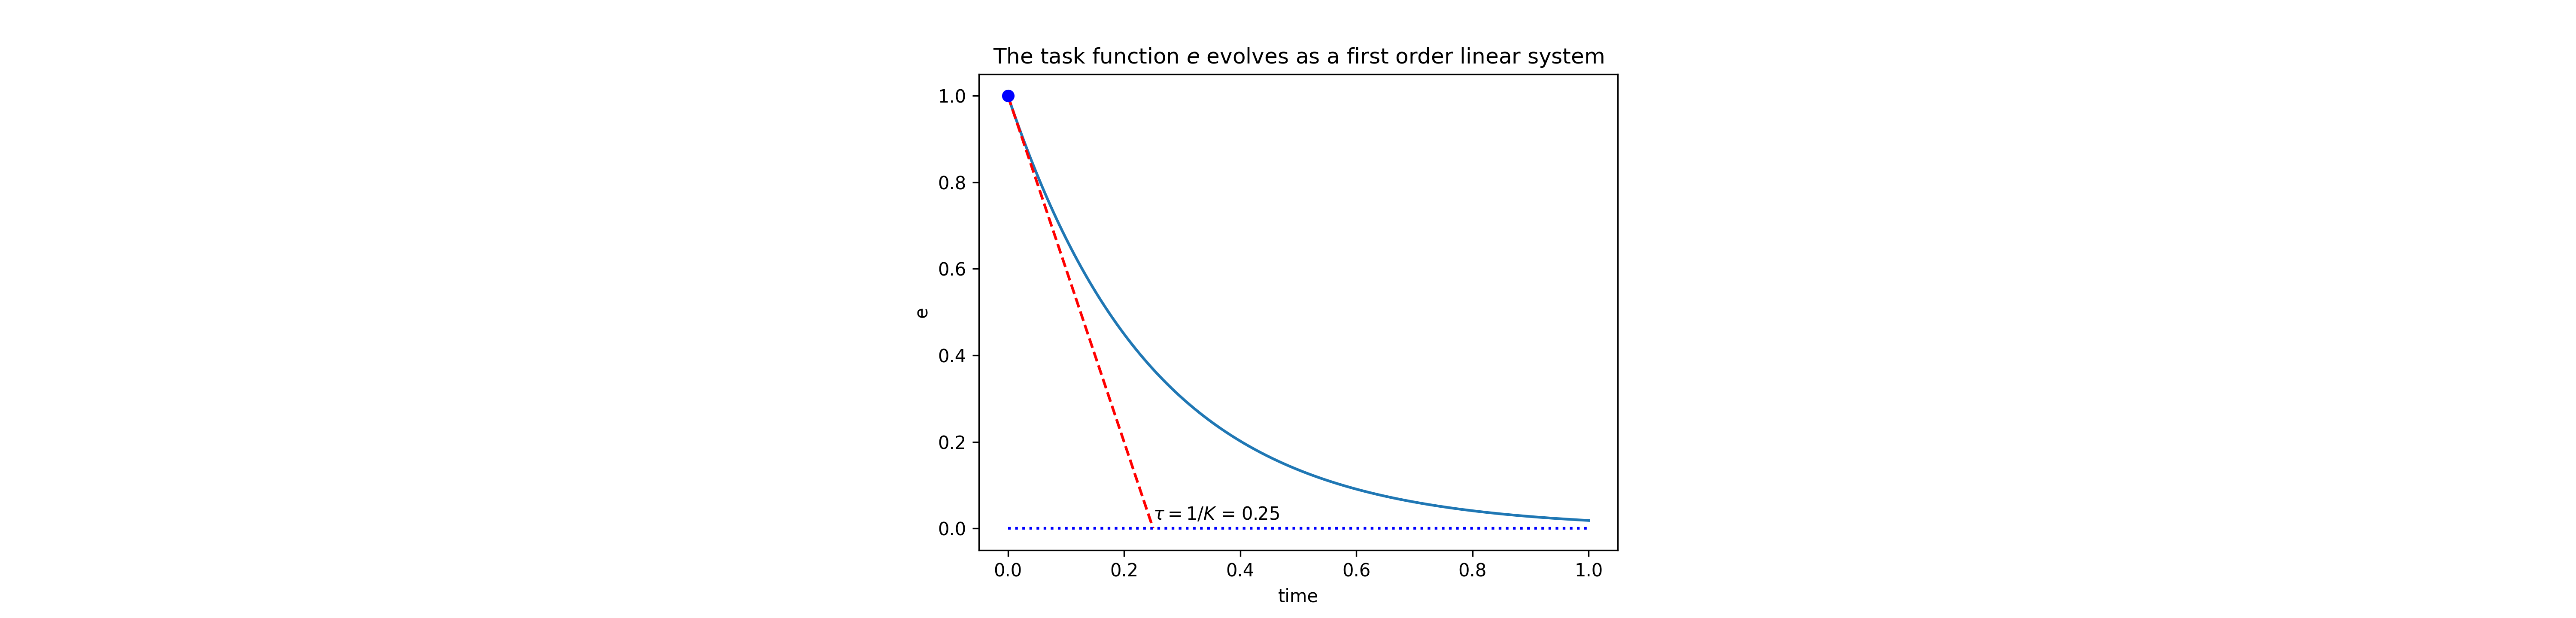 The behavior of a first order system